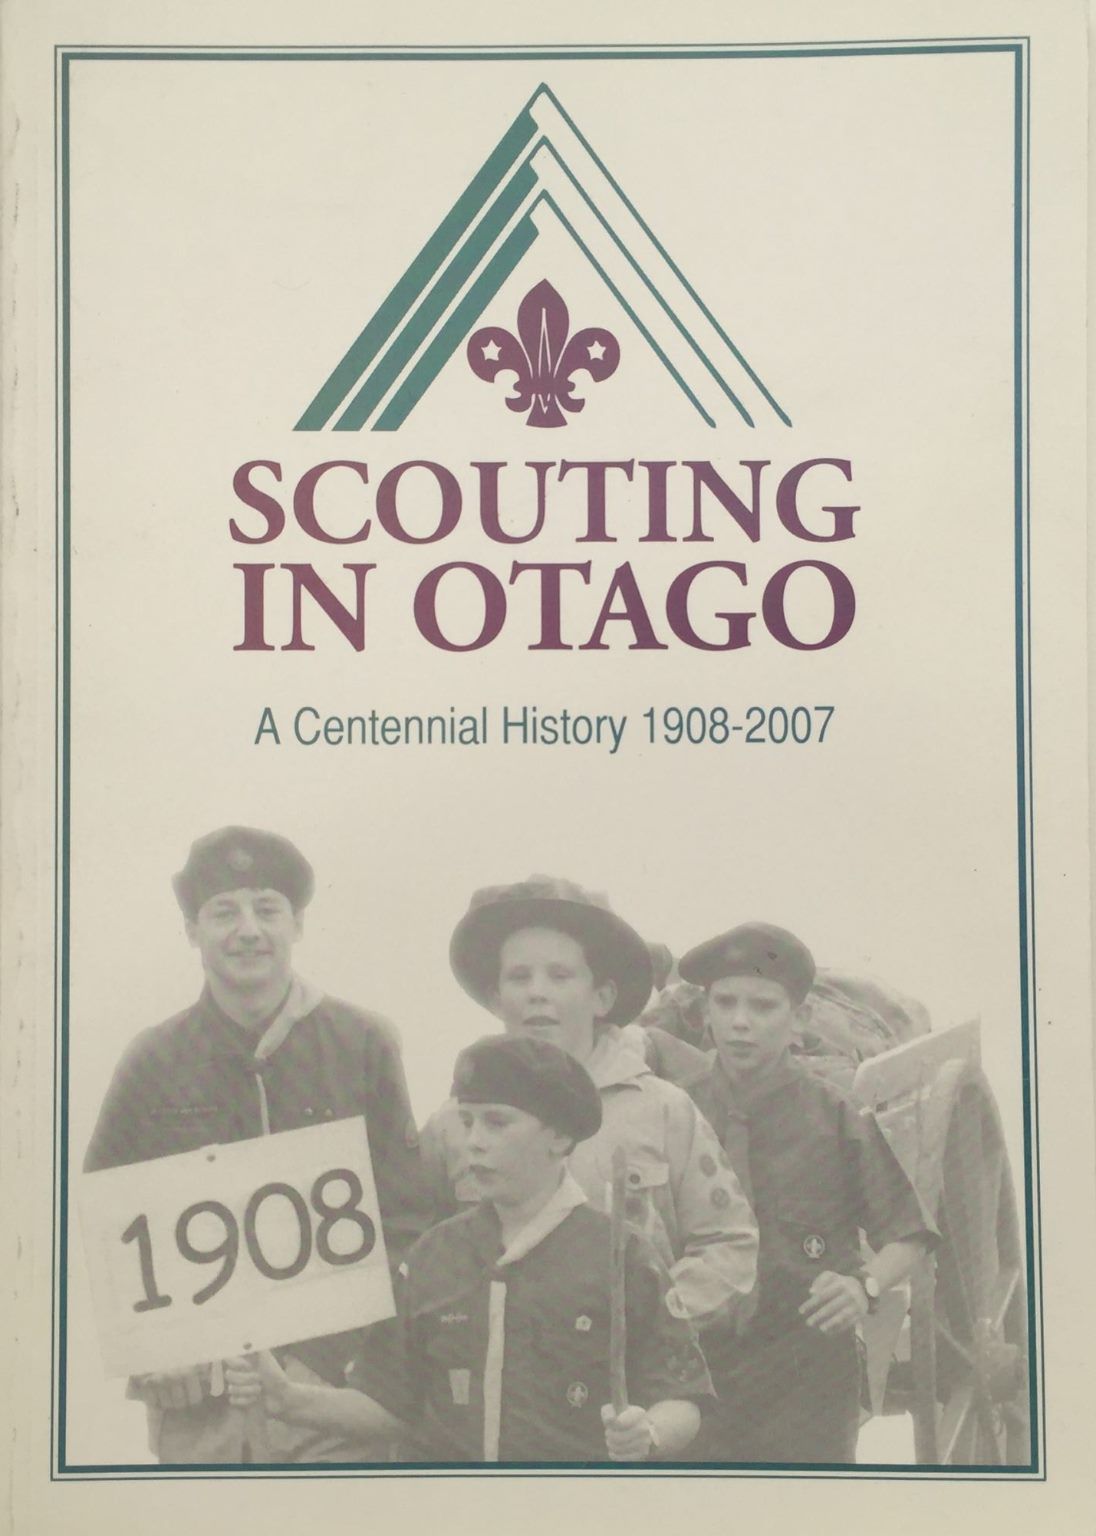 SCOUTING IN OTAGO: A Centennial History 1908-2007